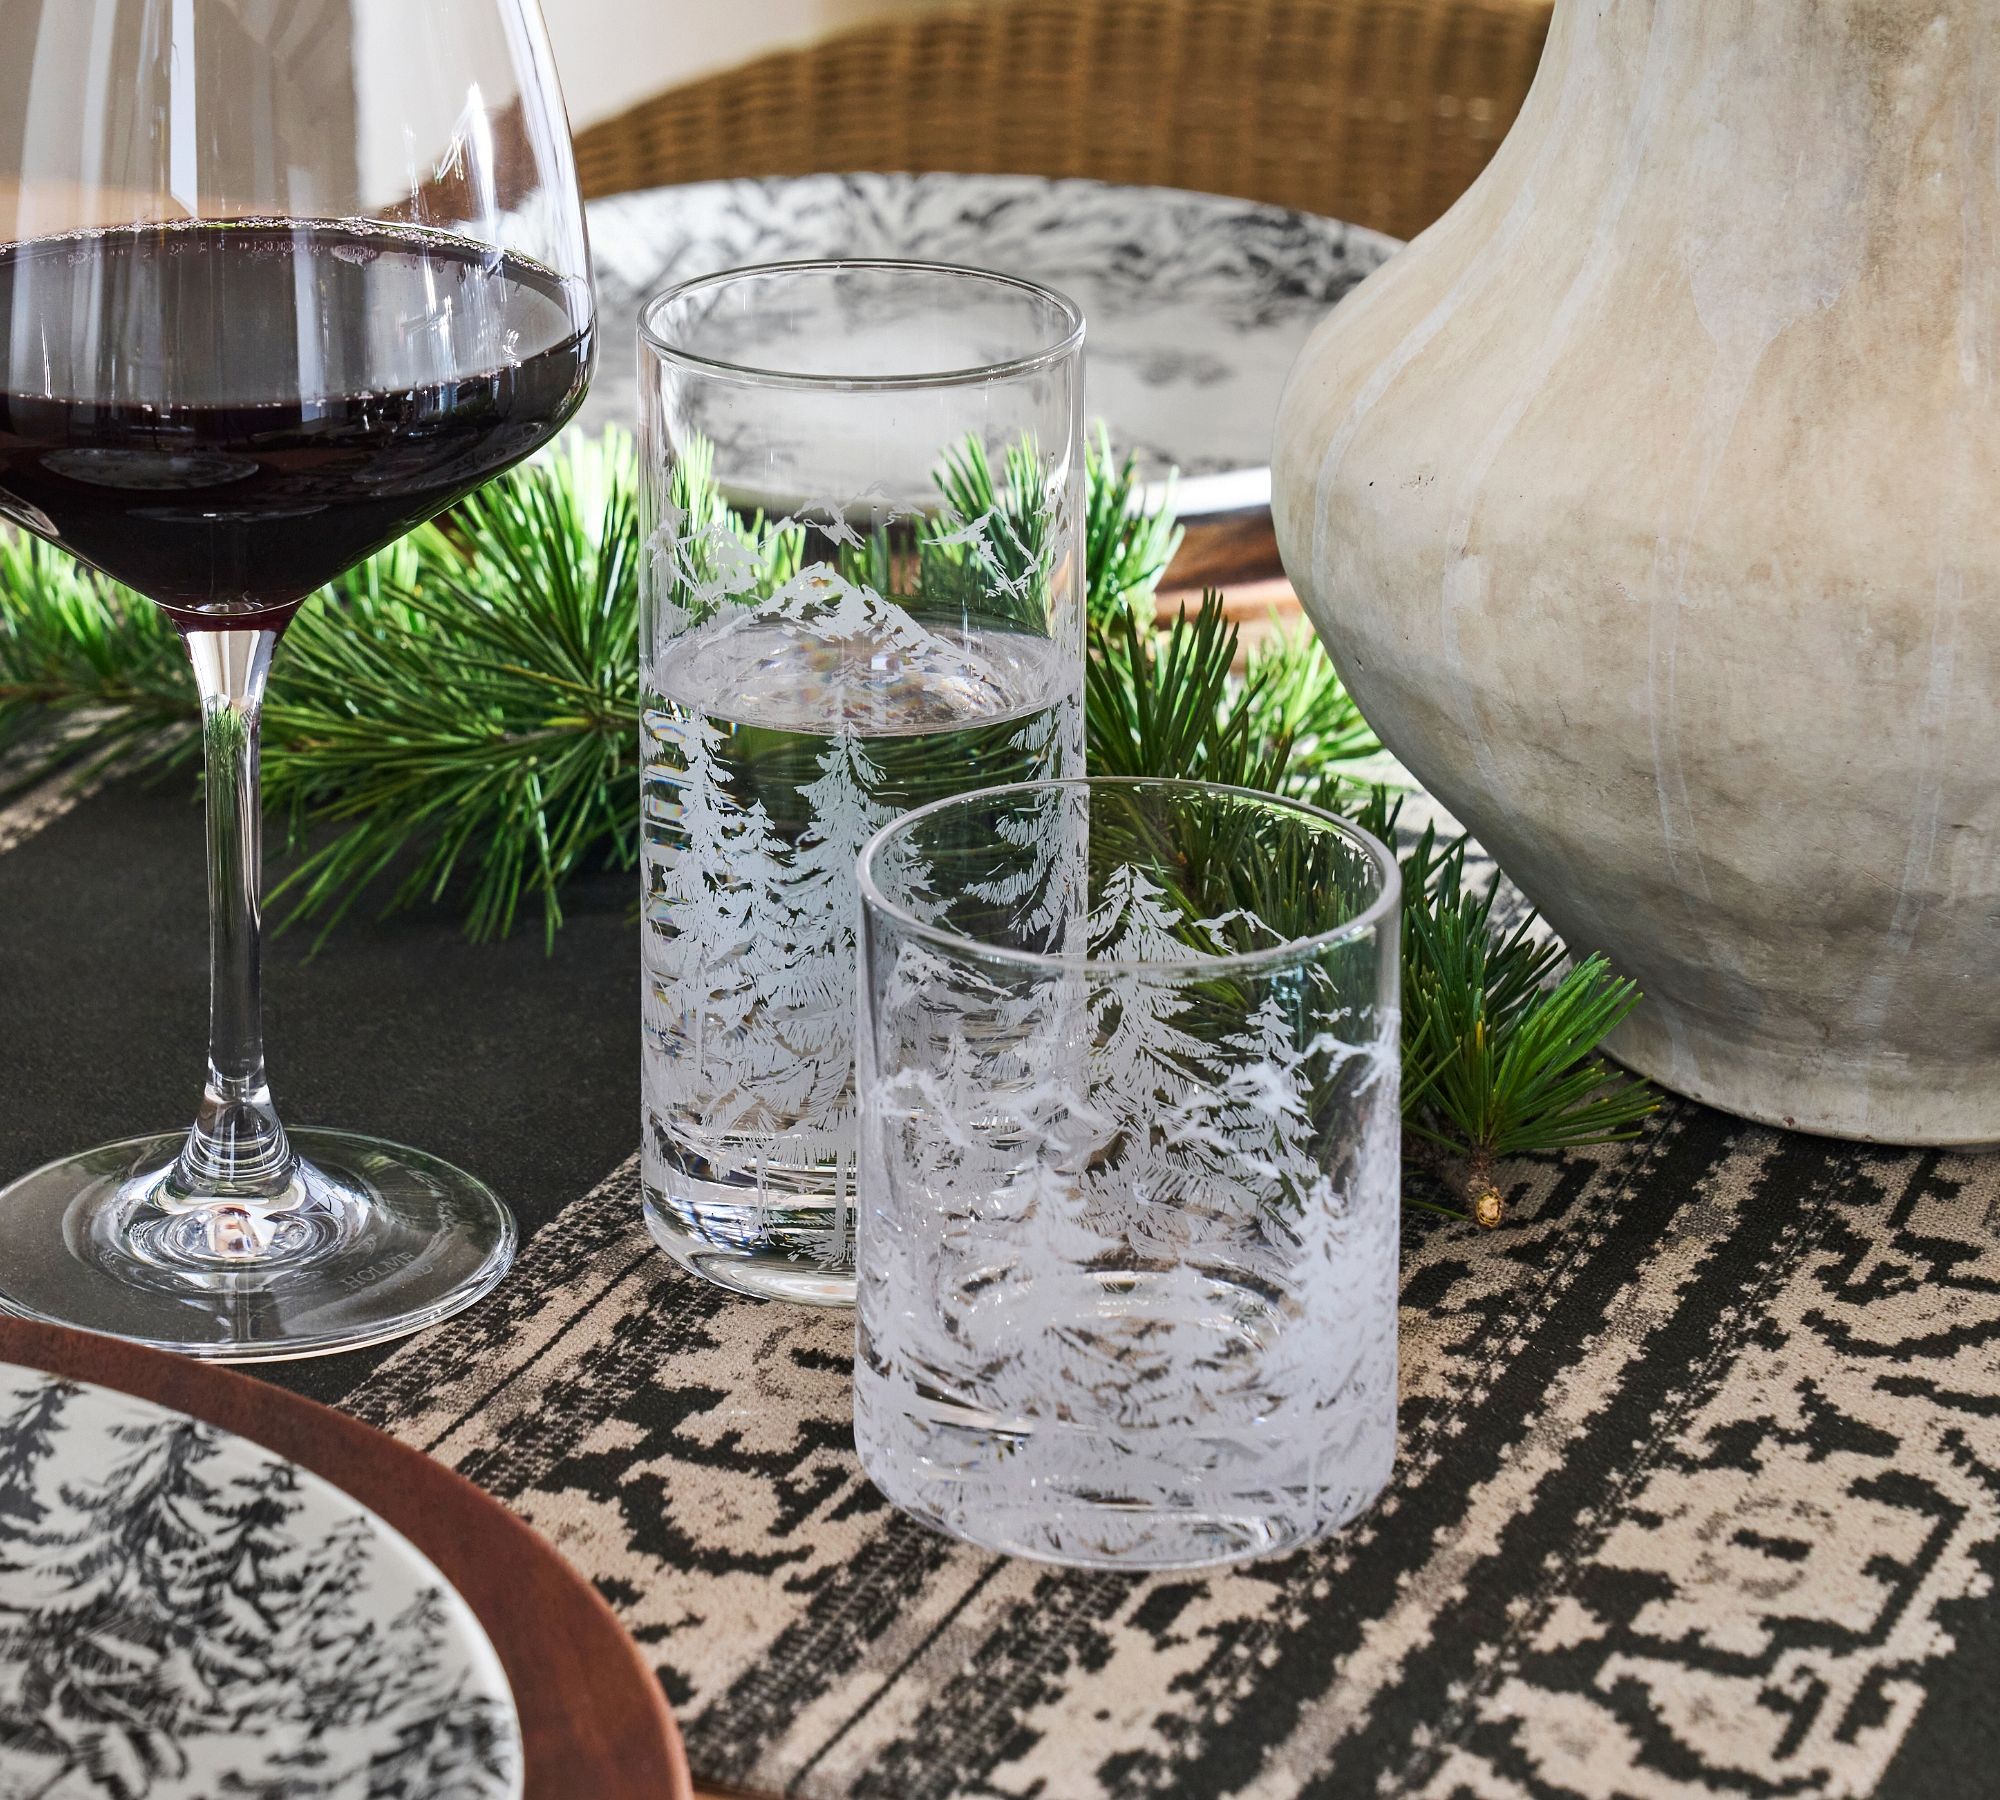 Rustic Forest Cocktail Glasses - Set of 4